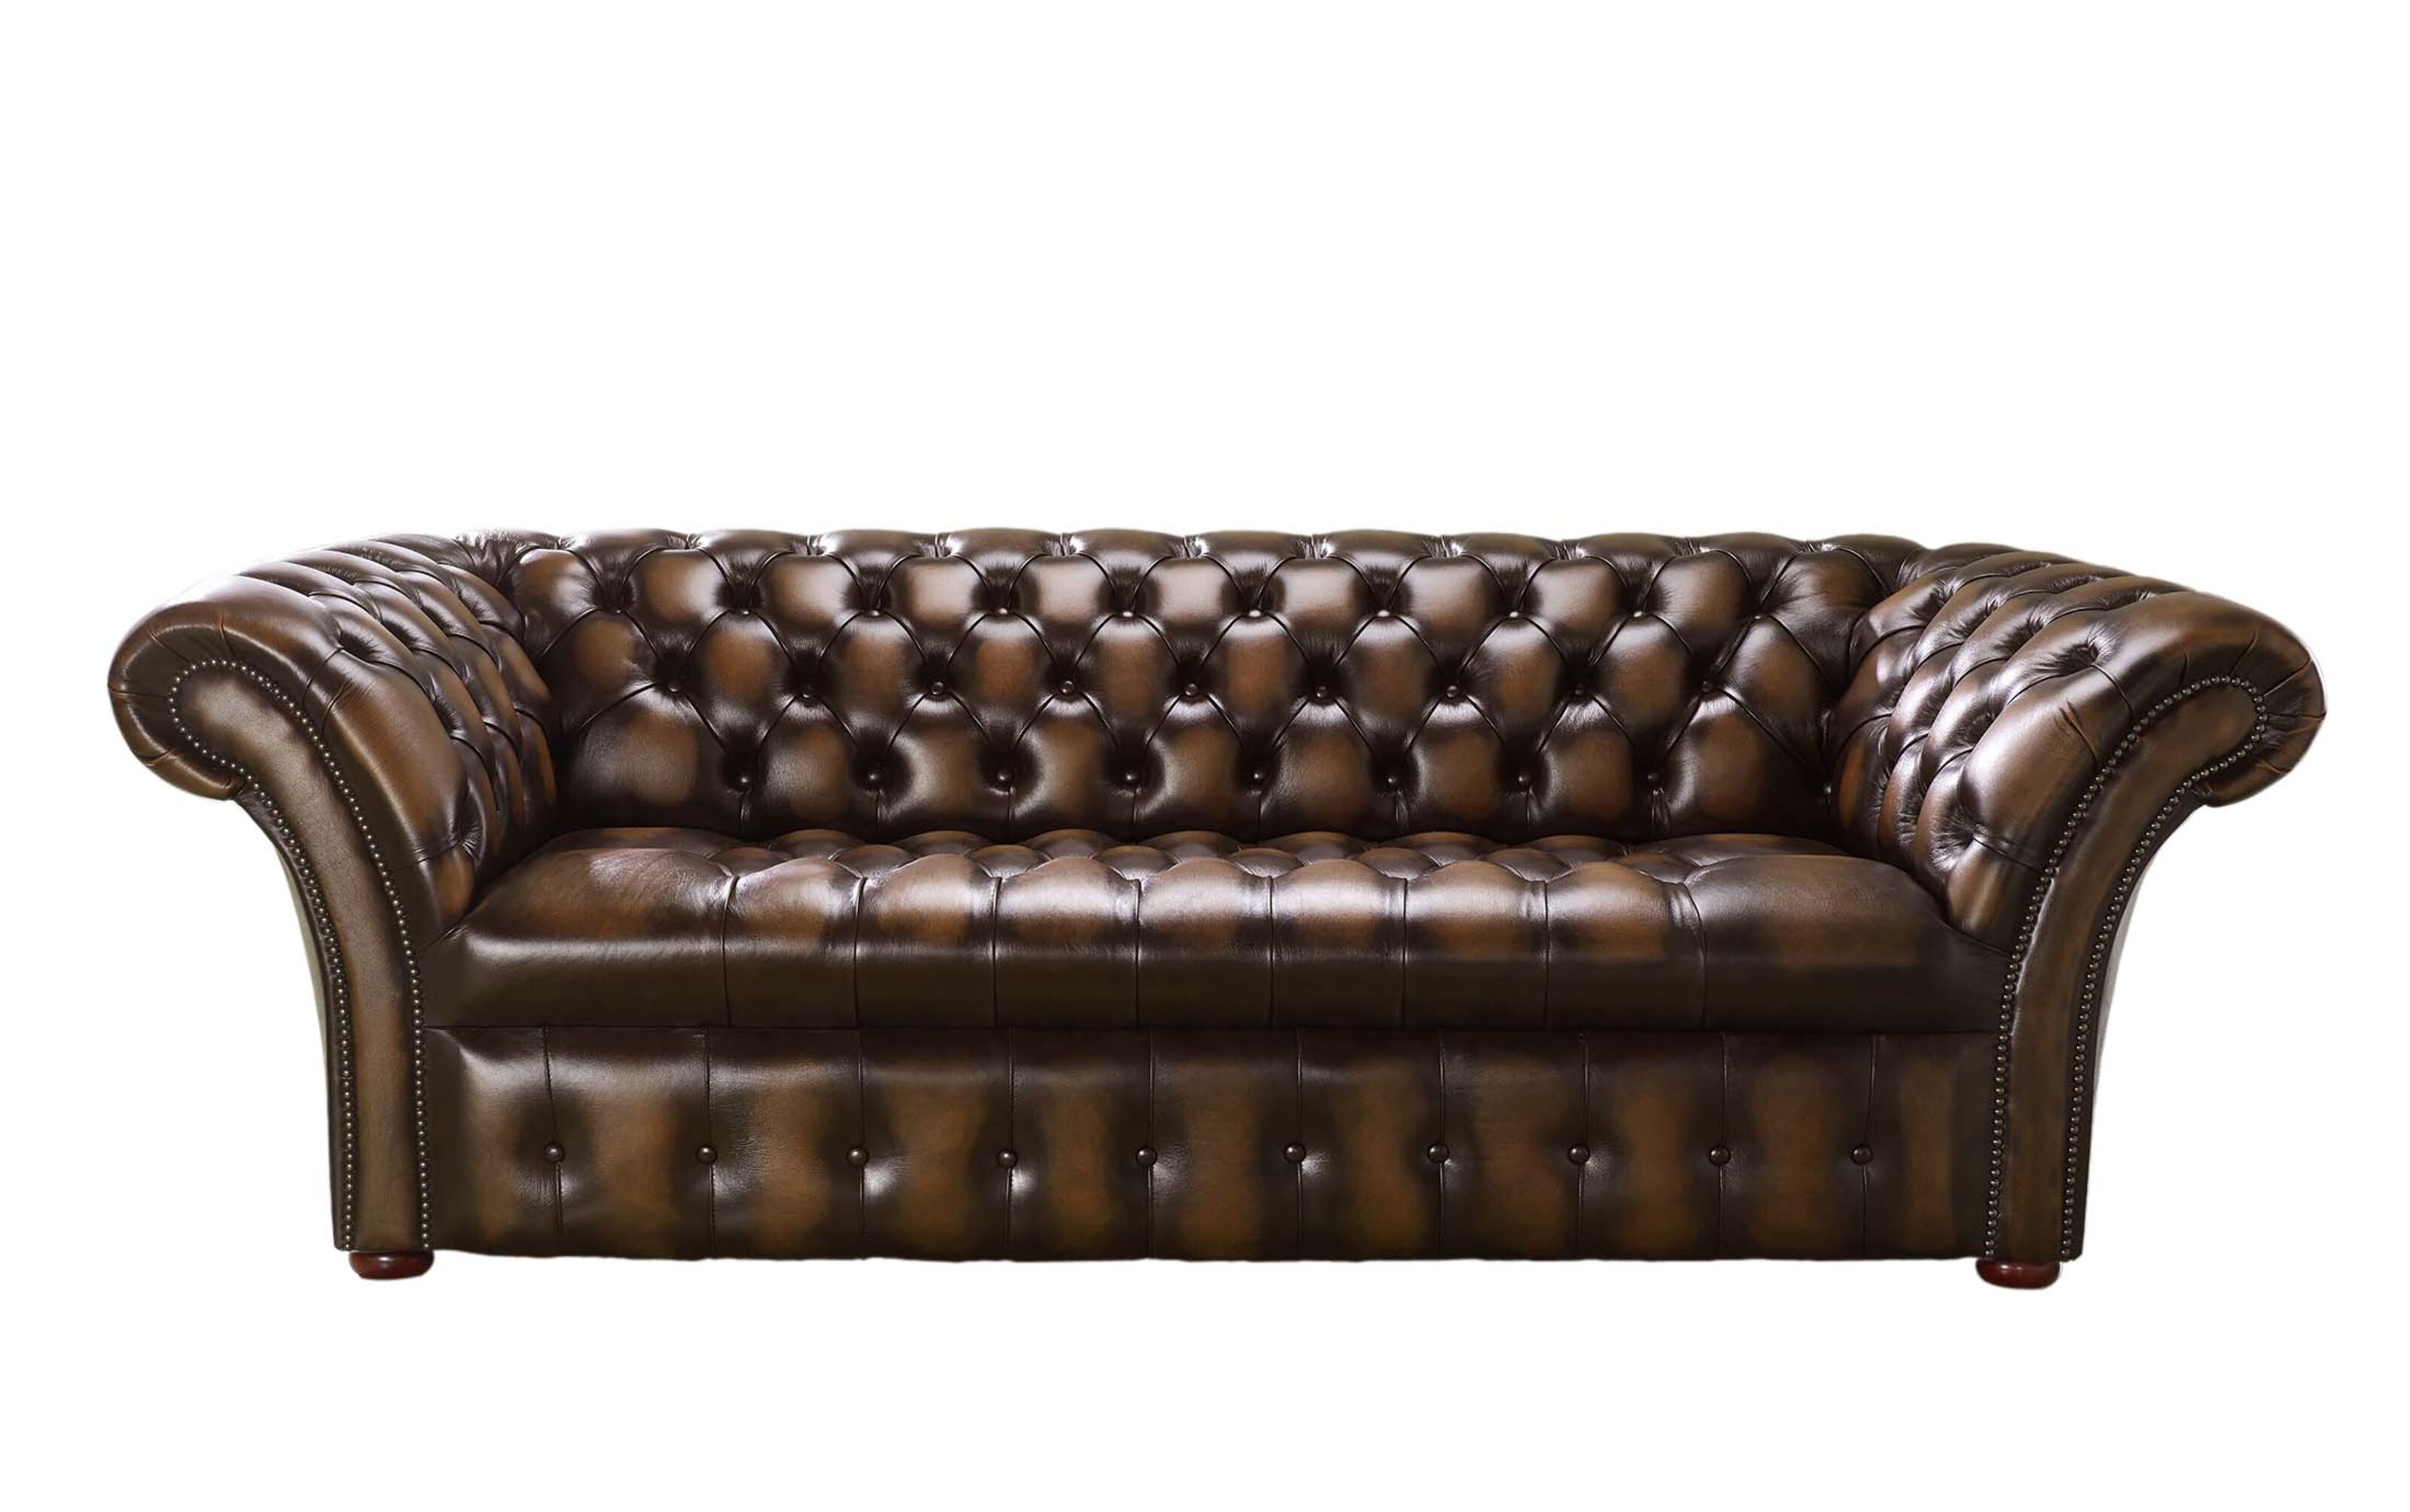 Discover Your Dream Sofa: Shop Gorgeous and Elegant Leather Sofas  %Post Title